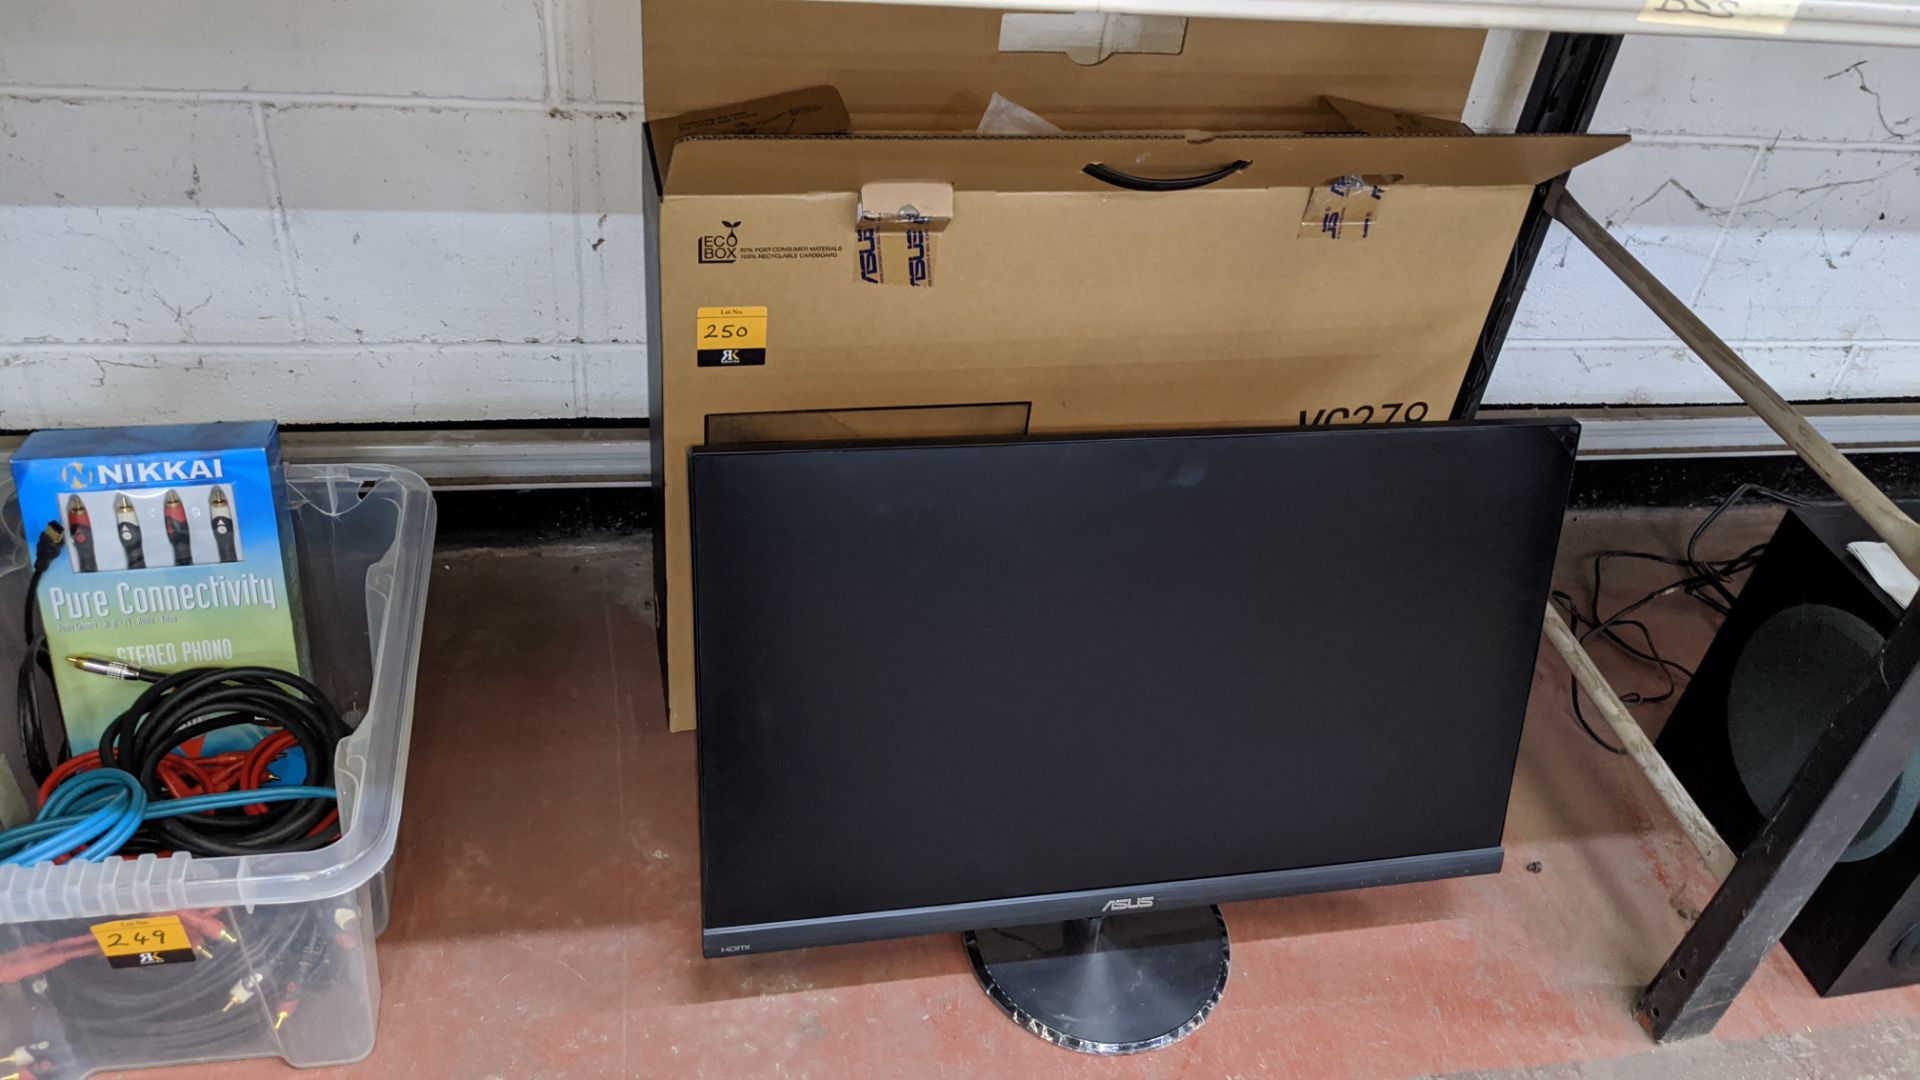 Asus model VC279 27" widescreen monitor with table top stand & box - line on screen